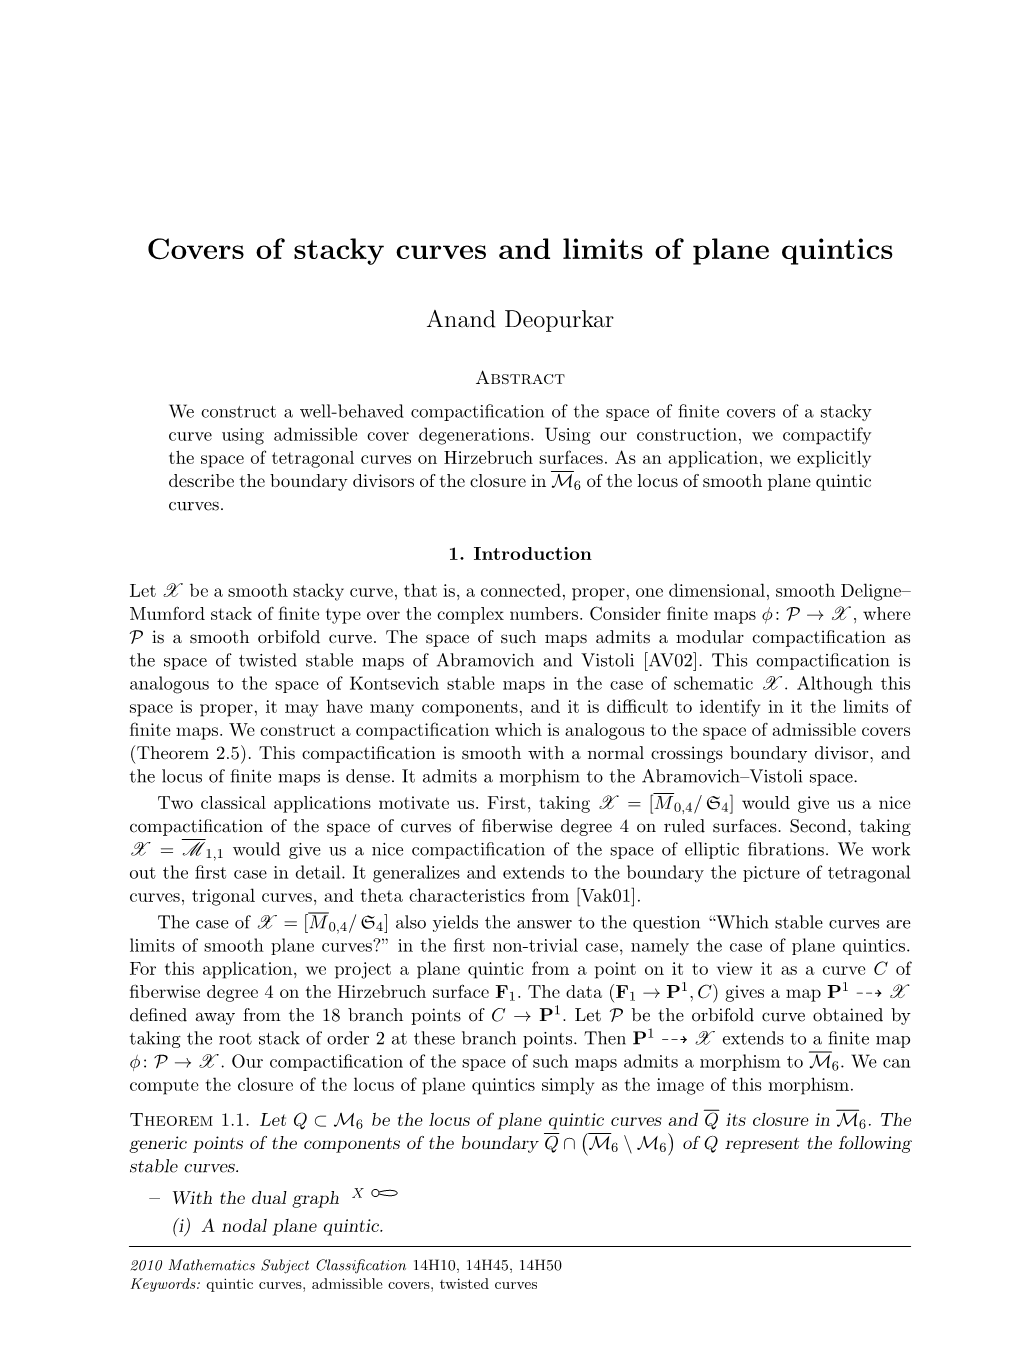 Covers of Stacky Curves and Limits of Plane Quintics